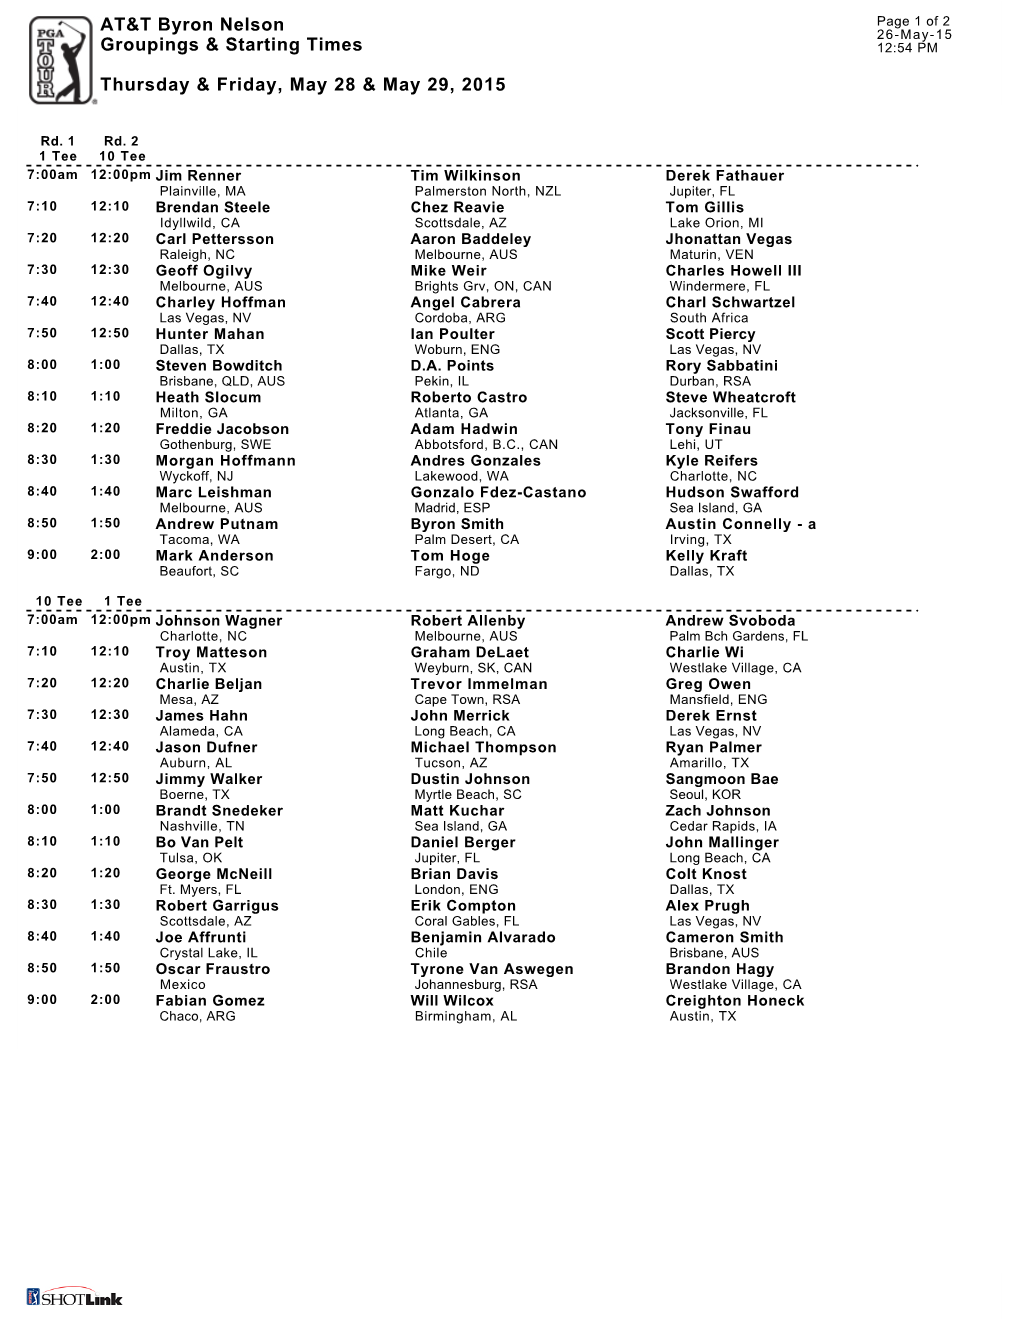 AT&T Byron Nelson Groupings & Starting Times Thursday & Friday